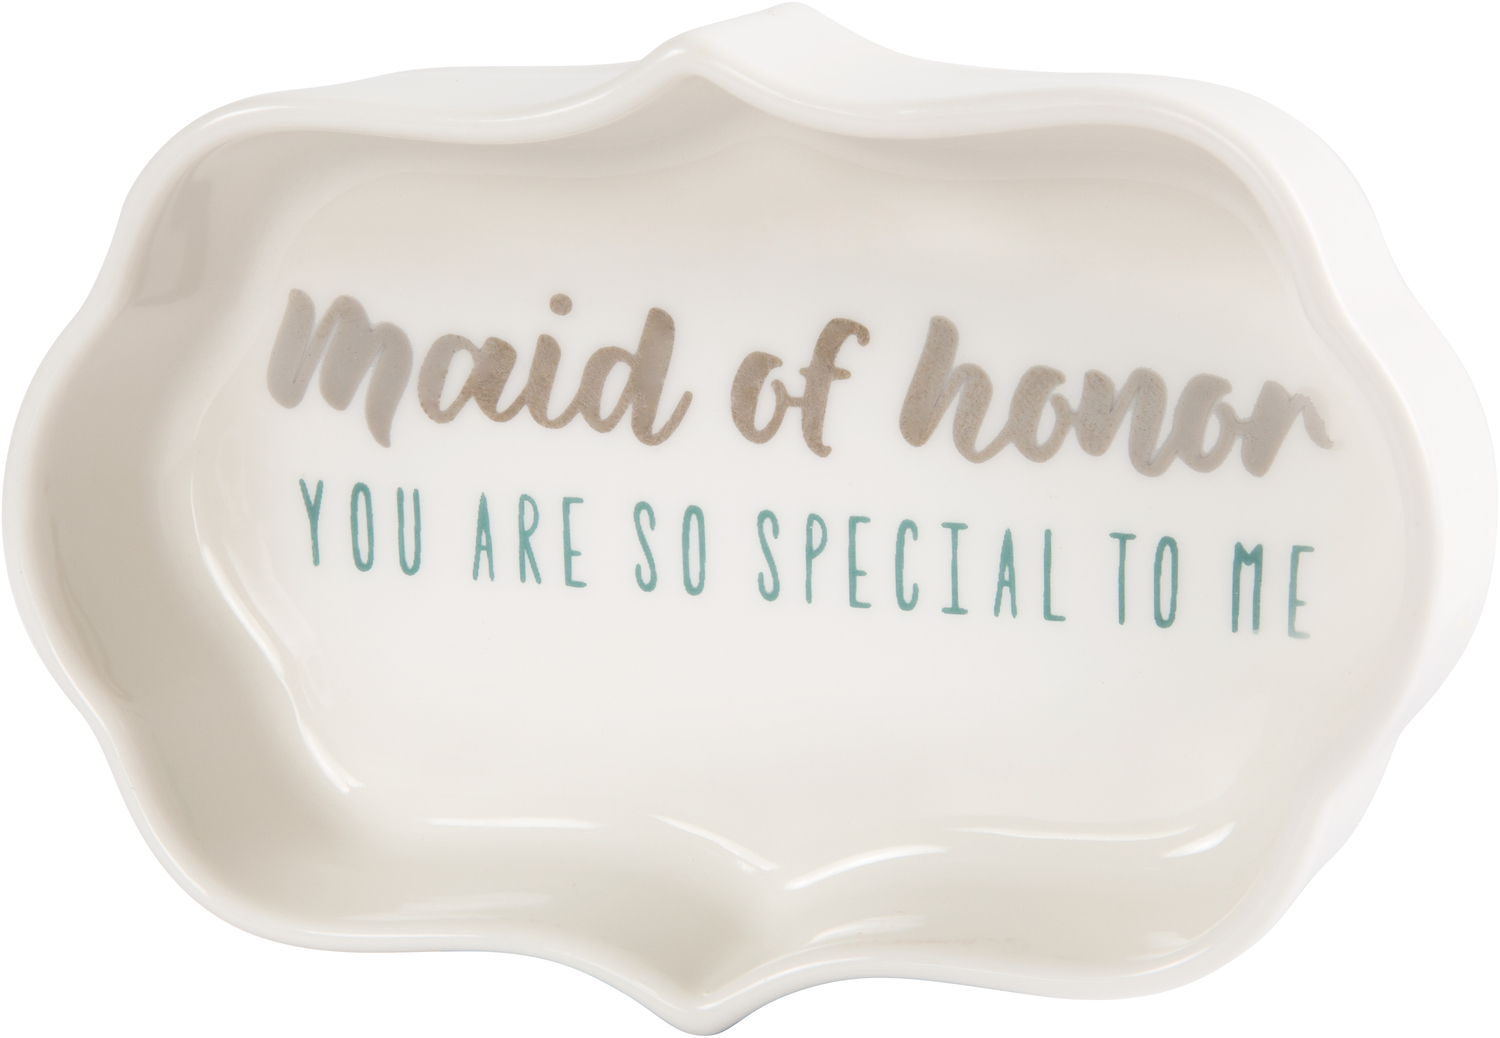 Maid of Honor by Best Kept Trinkets - Maid of Honor - 4" Trinket Dish